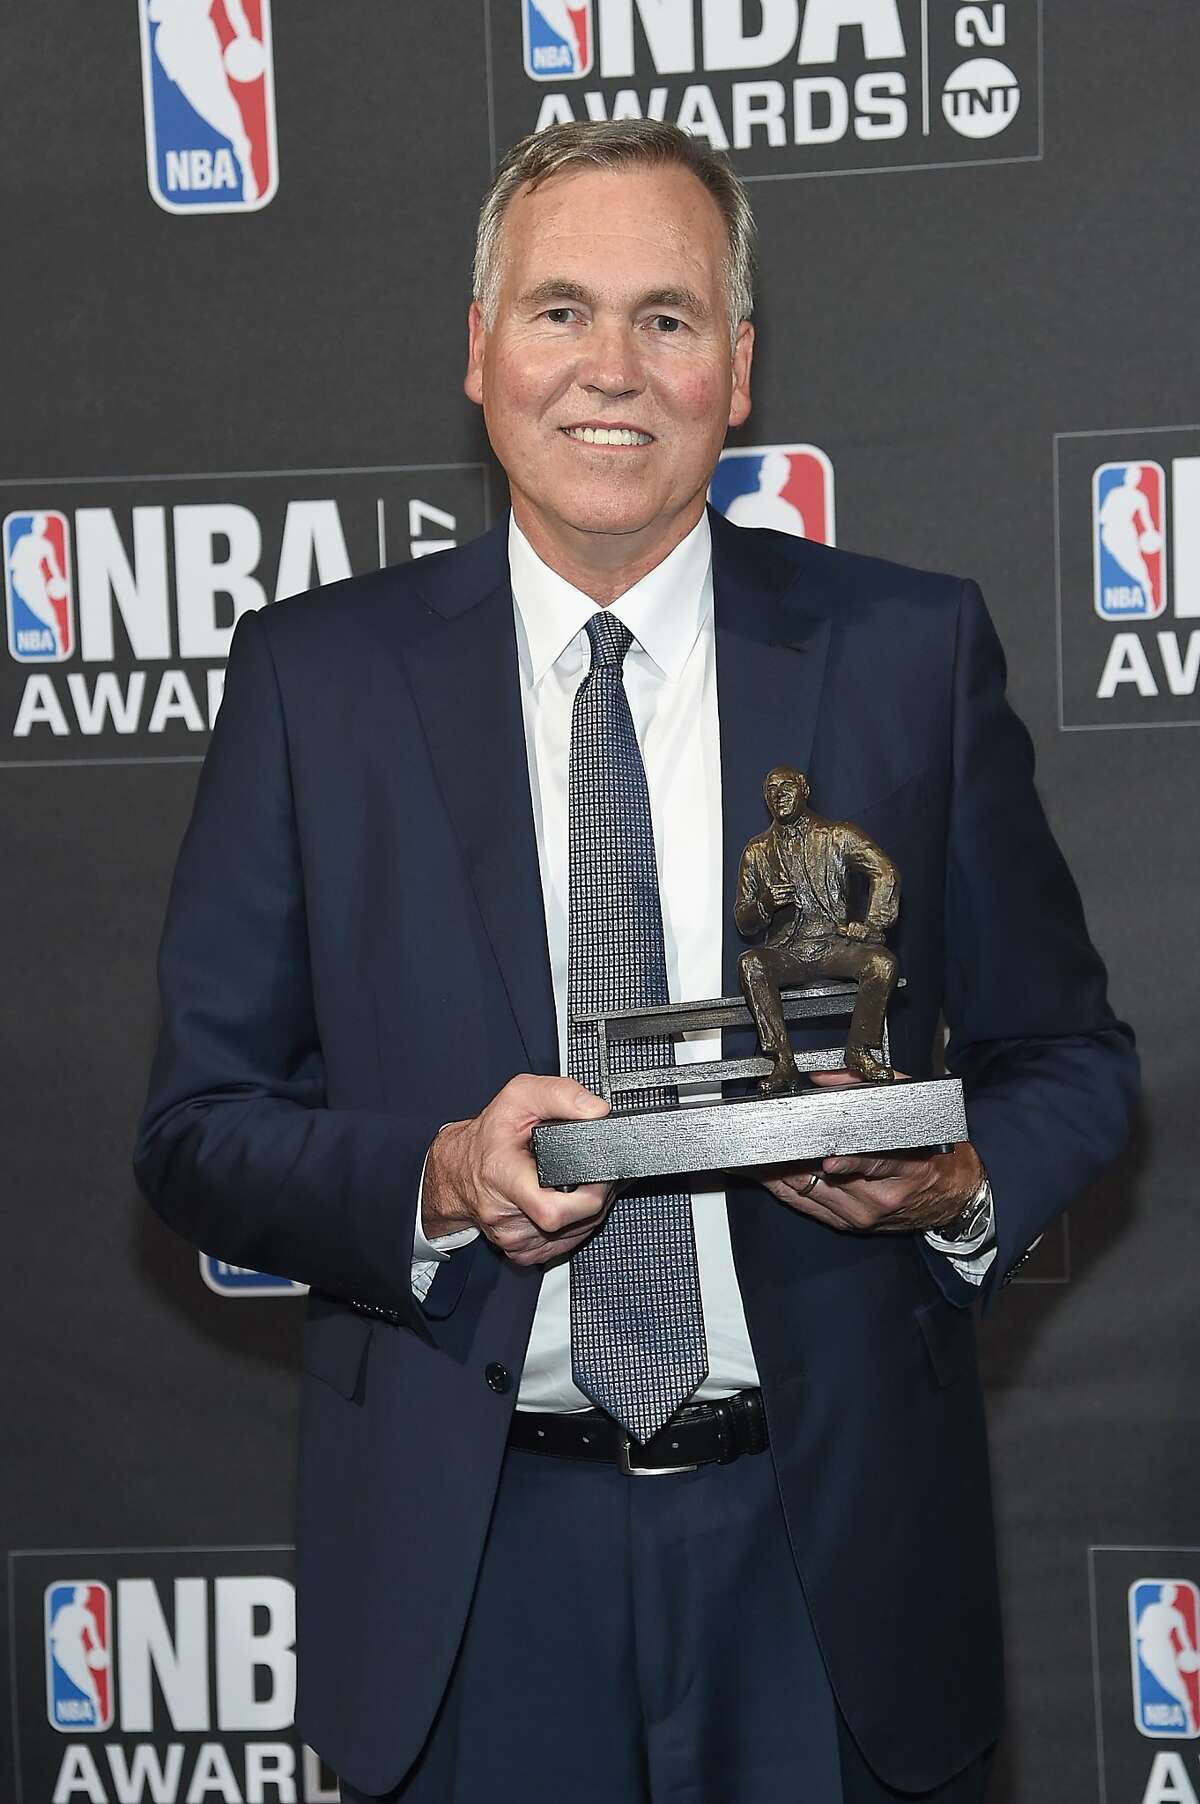 NEW YORK, NY - JUNE 26: Coach Mike D'Antoni poses with the NBA Coach of the Year award at the 2017 NBA Awards live on TNT on June 26, 2017 in New York, New York. 27111_003 (Photo by Jamie McCarthy/Getty Images for TNT)